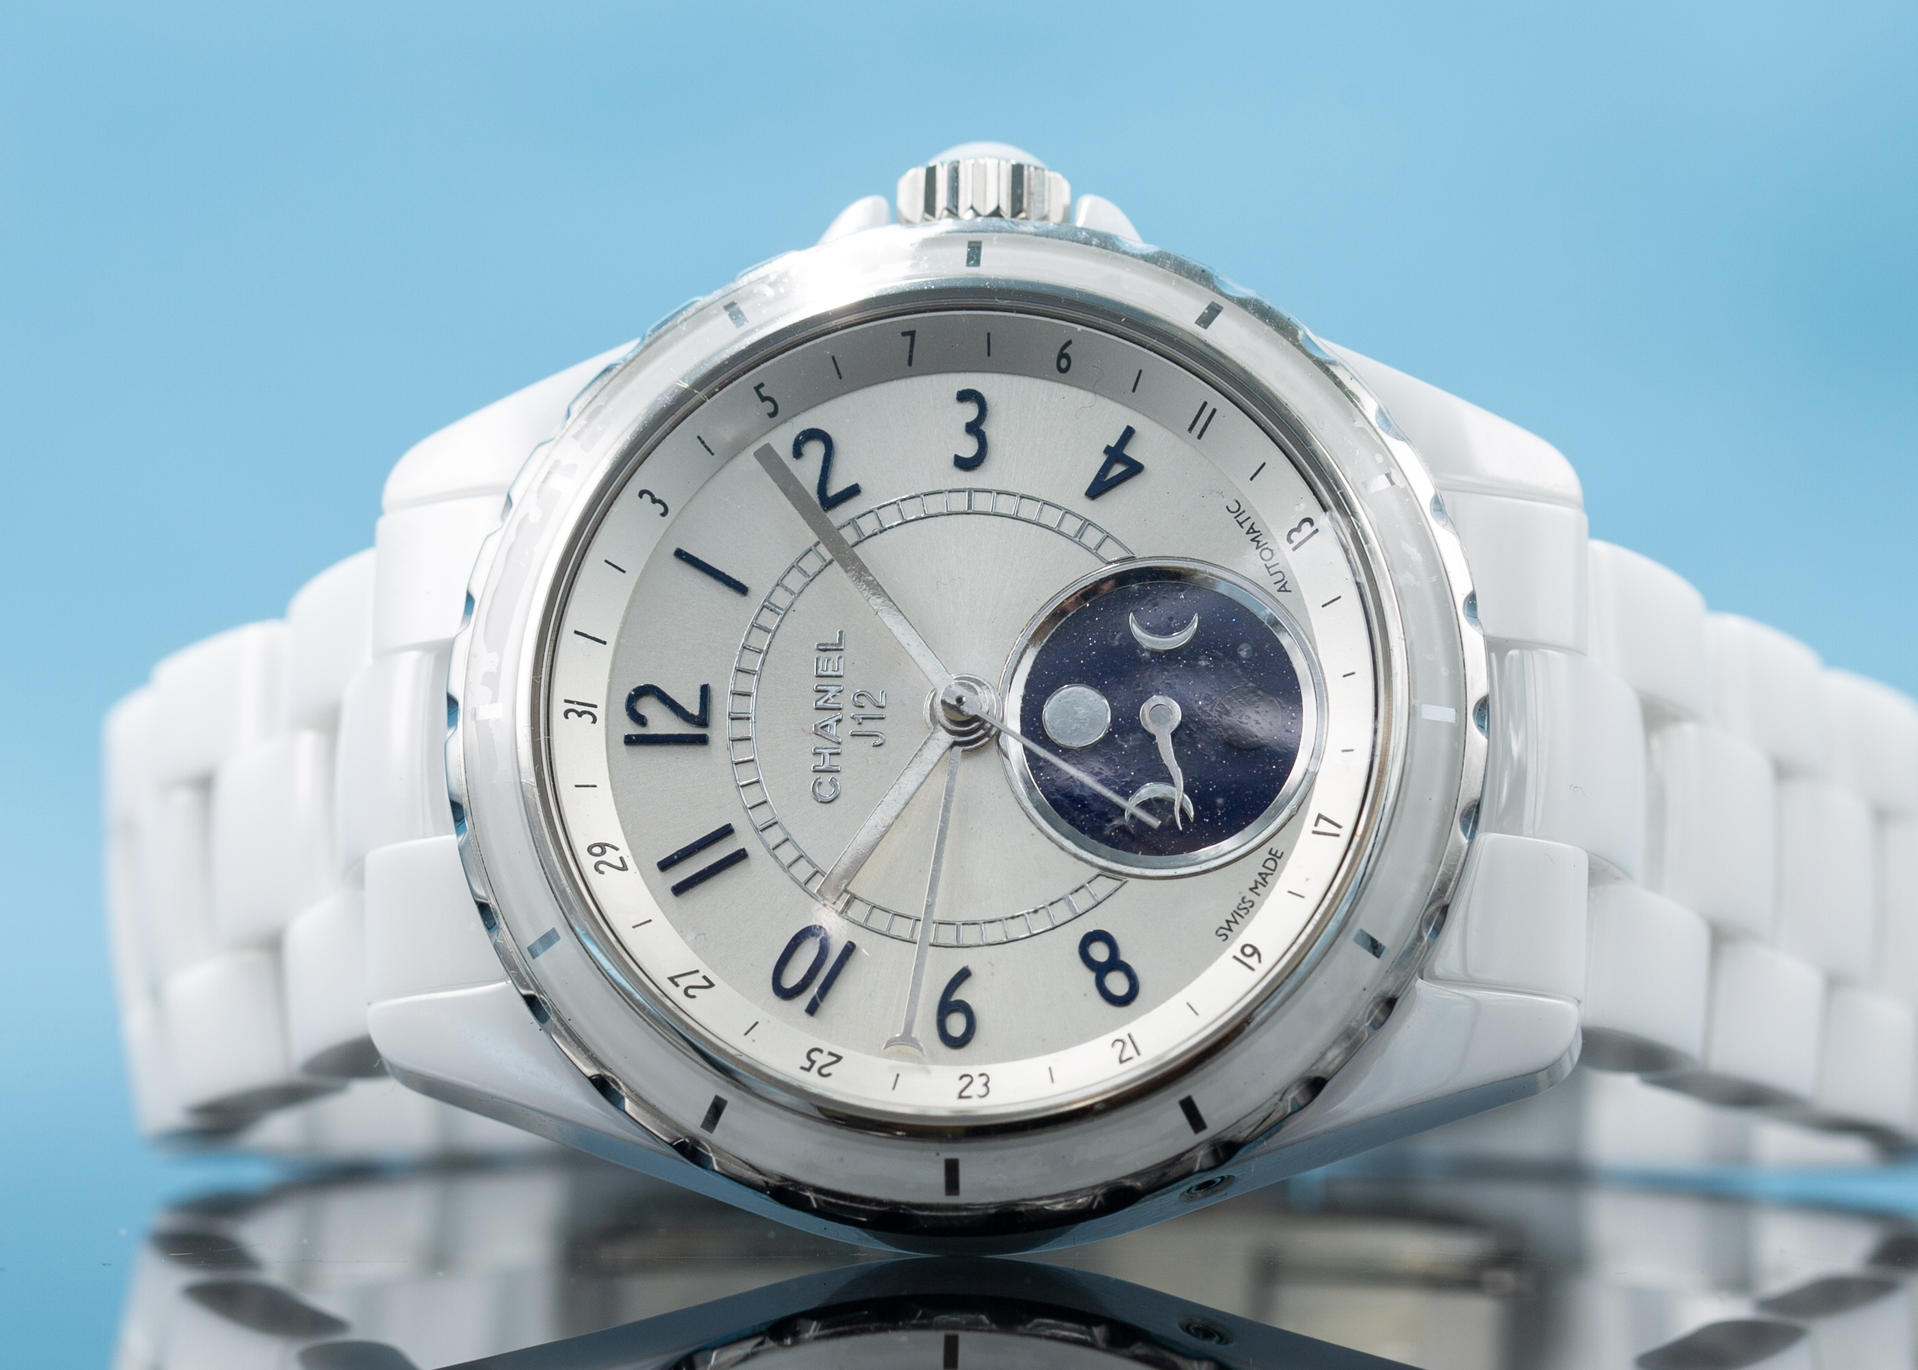 J12 White  Watches  CHANEL